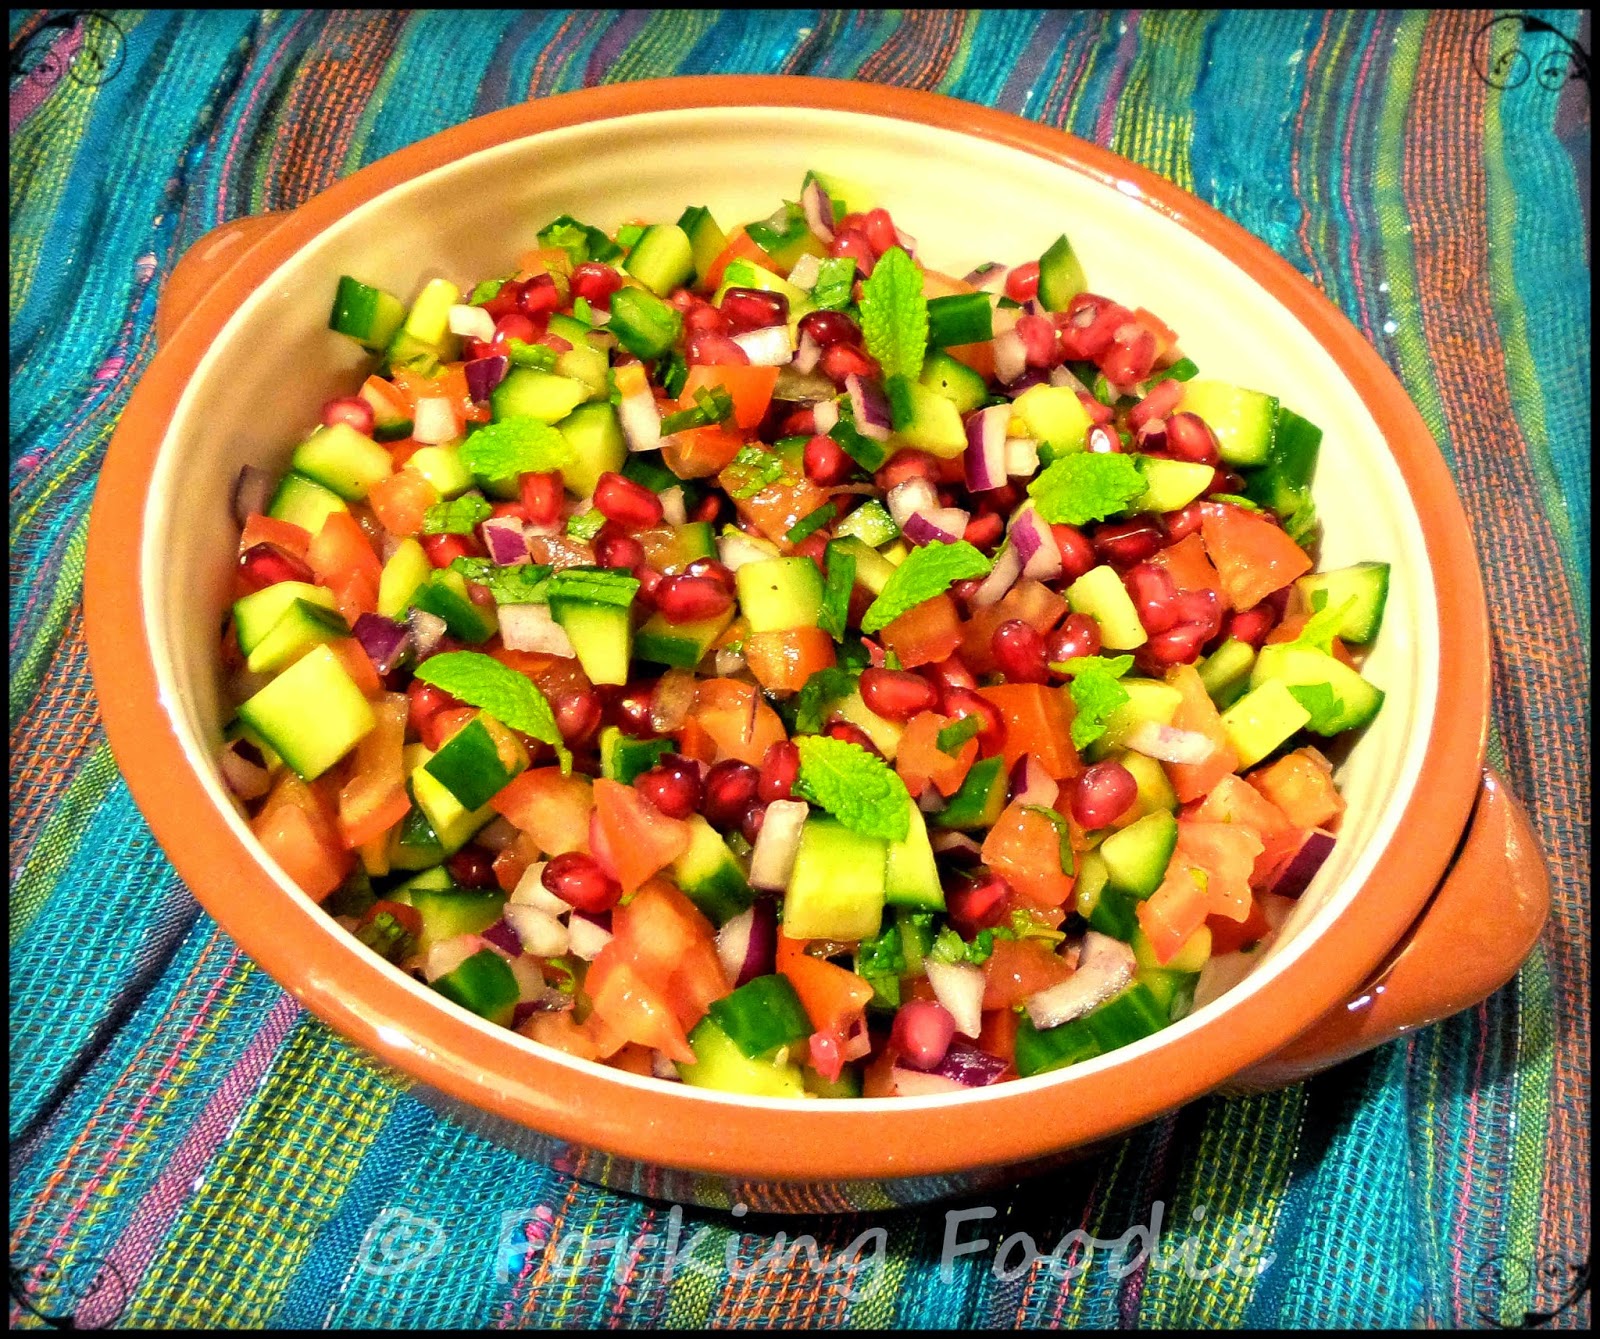 Forking Foodie: Salad Shirazi with Pomegranate Seeds